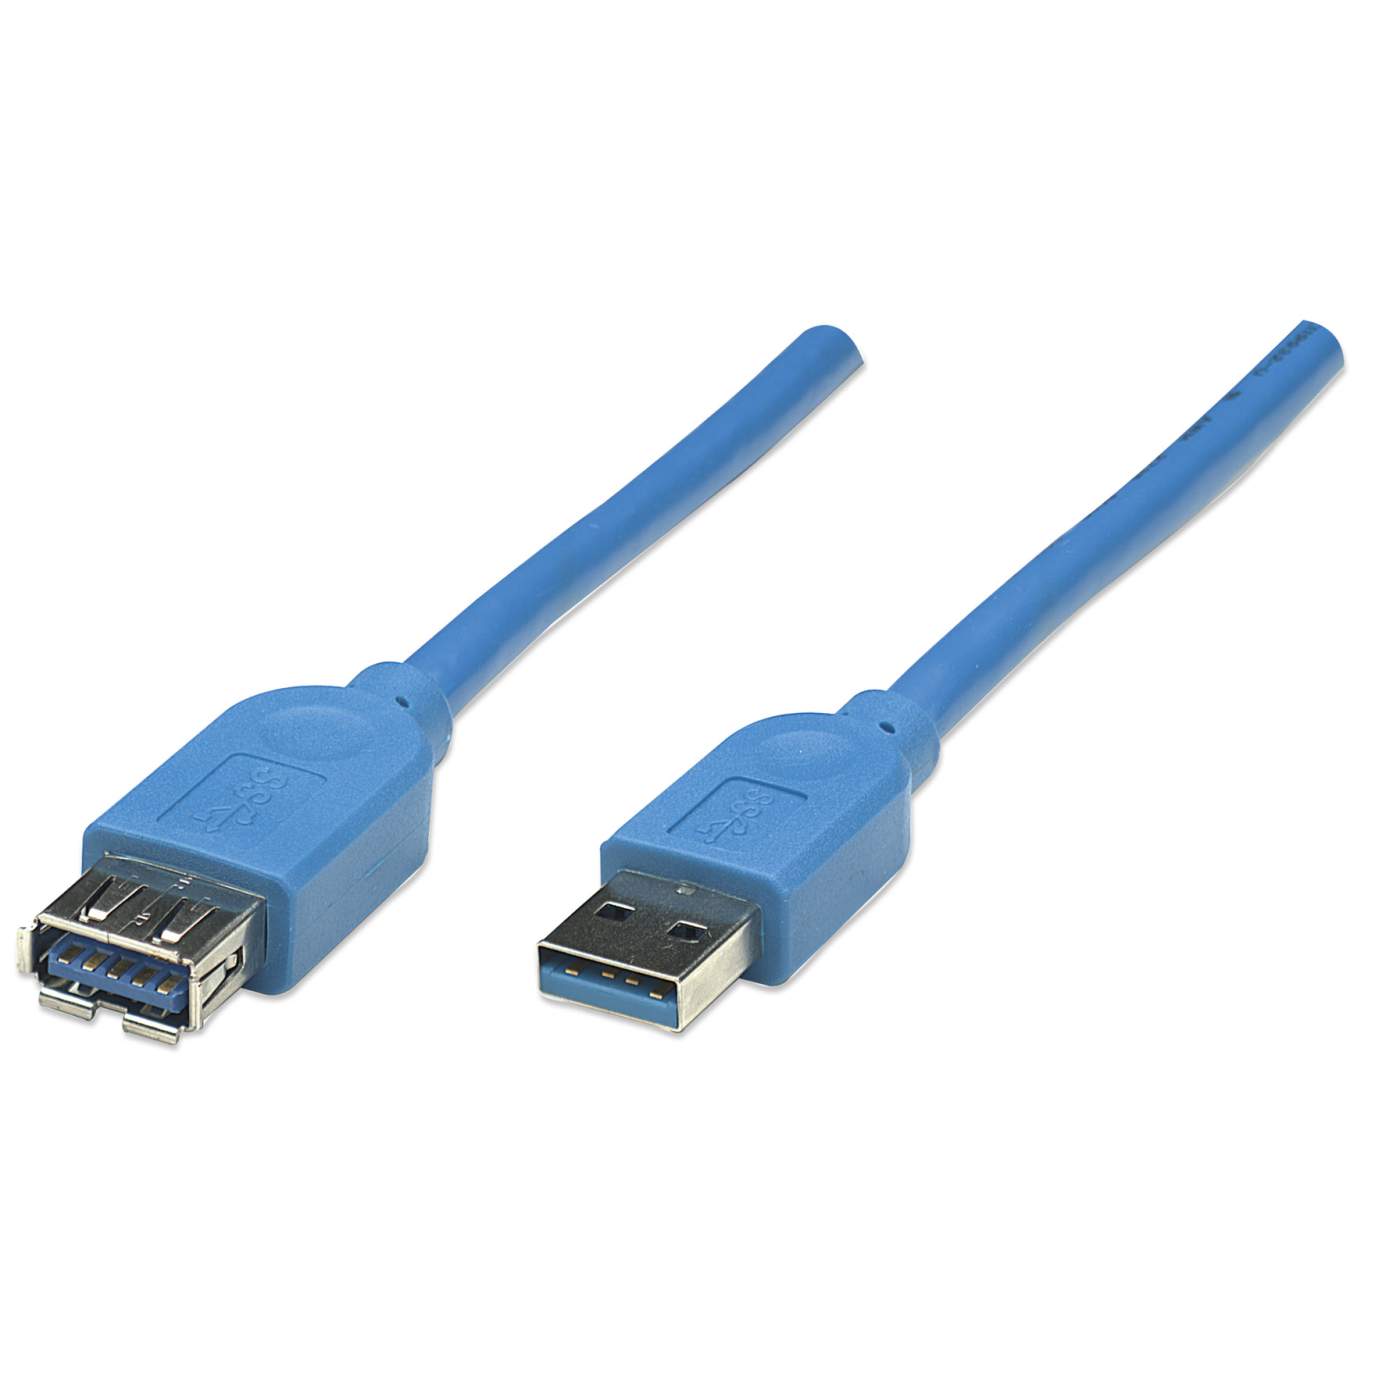 USB 3.0 Type-A Extension Cable Image 1